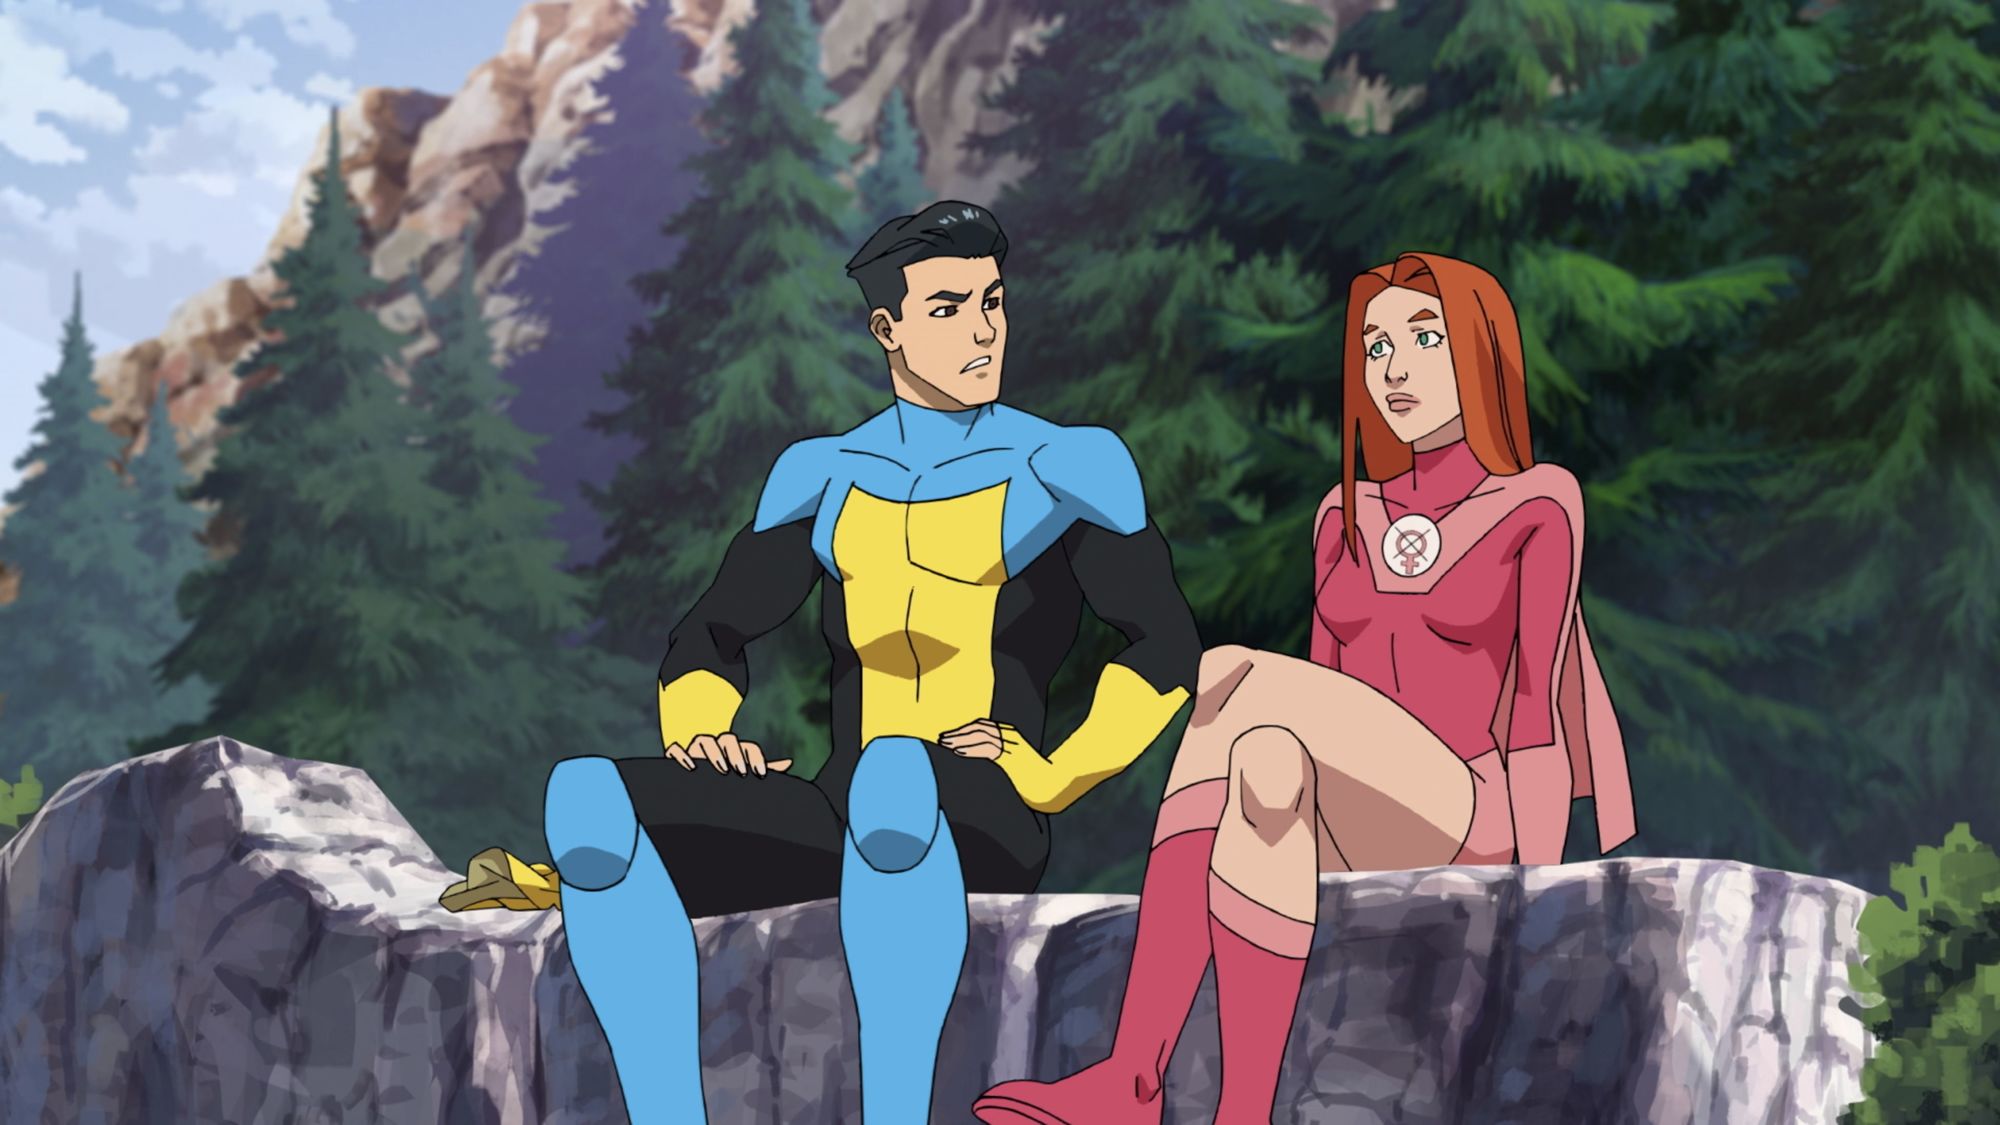 *Sing-song voice* Invincible and Atom Eve, sitting on a cliff, t-a-l-k-i-n-g. Photo source: Prime Video.